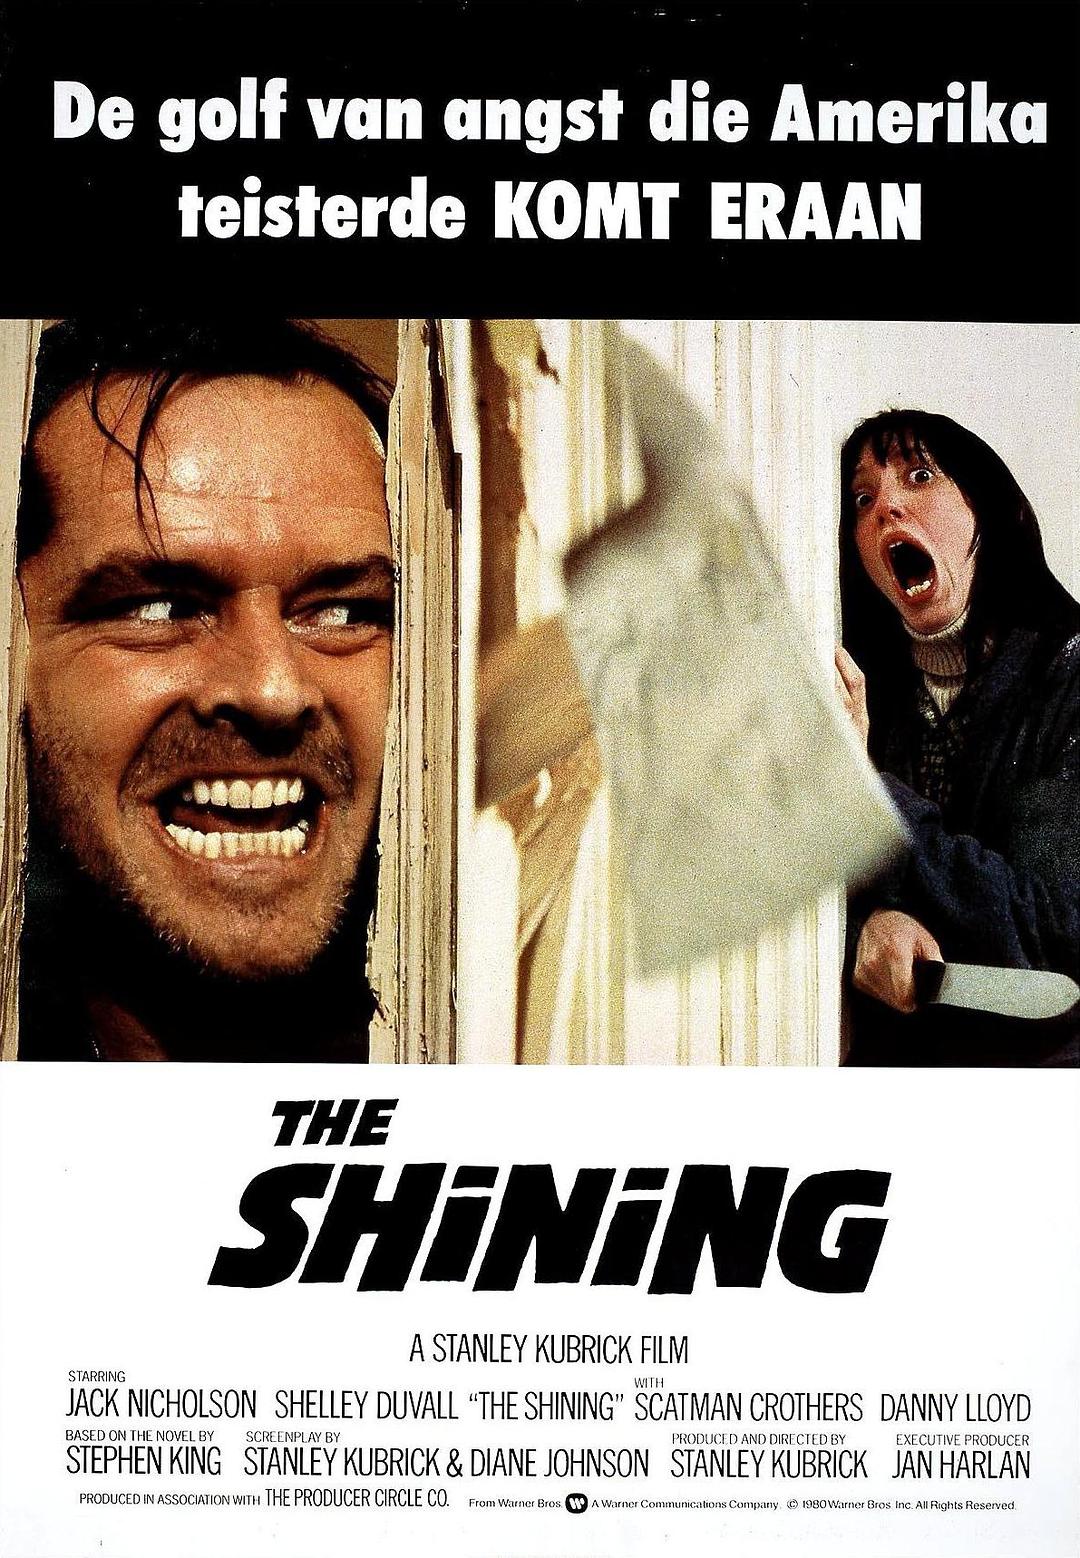 /þ The.Shining.1980.REMASTERED.720p.BluRay.X264-AMIABLE 8.02GB-1.png